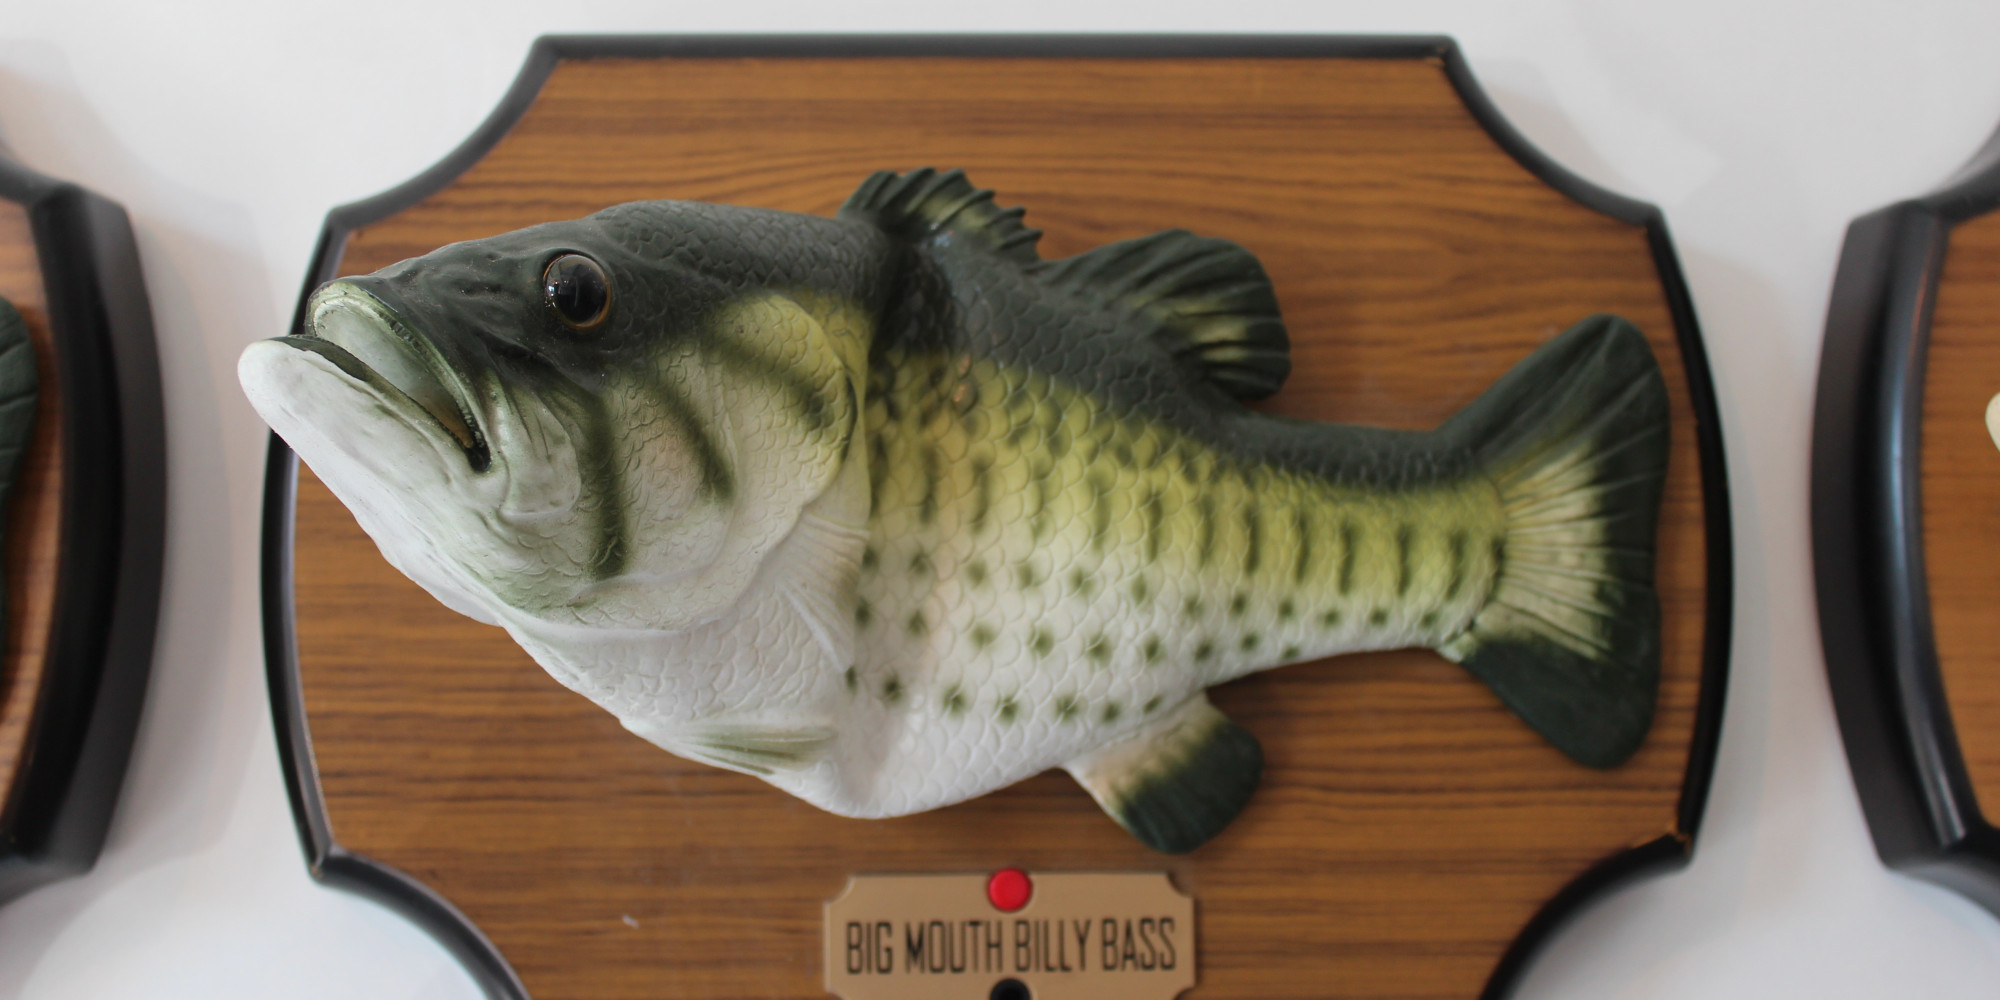 Big Mouth Billy Bass - Chances are you have an uncle with one of these still up in the basement. Over a million sold in 2000 alone.